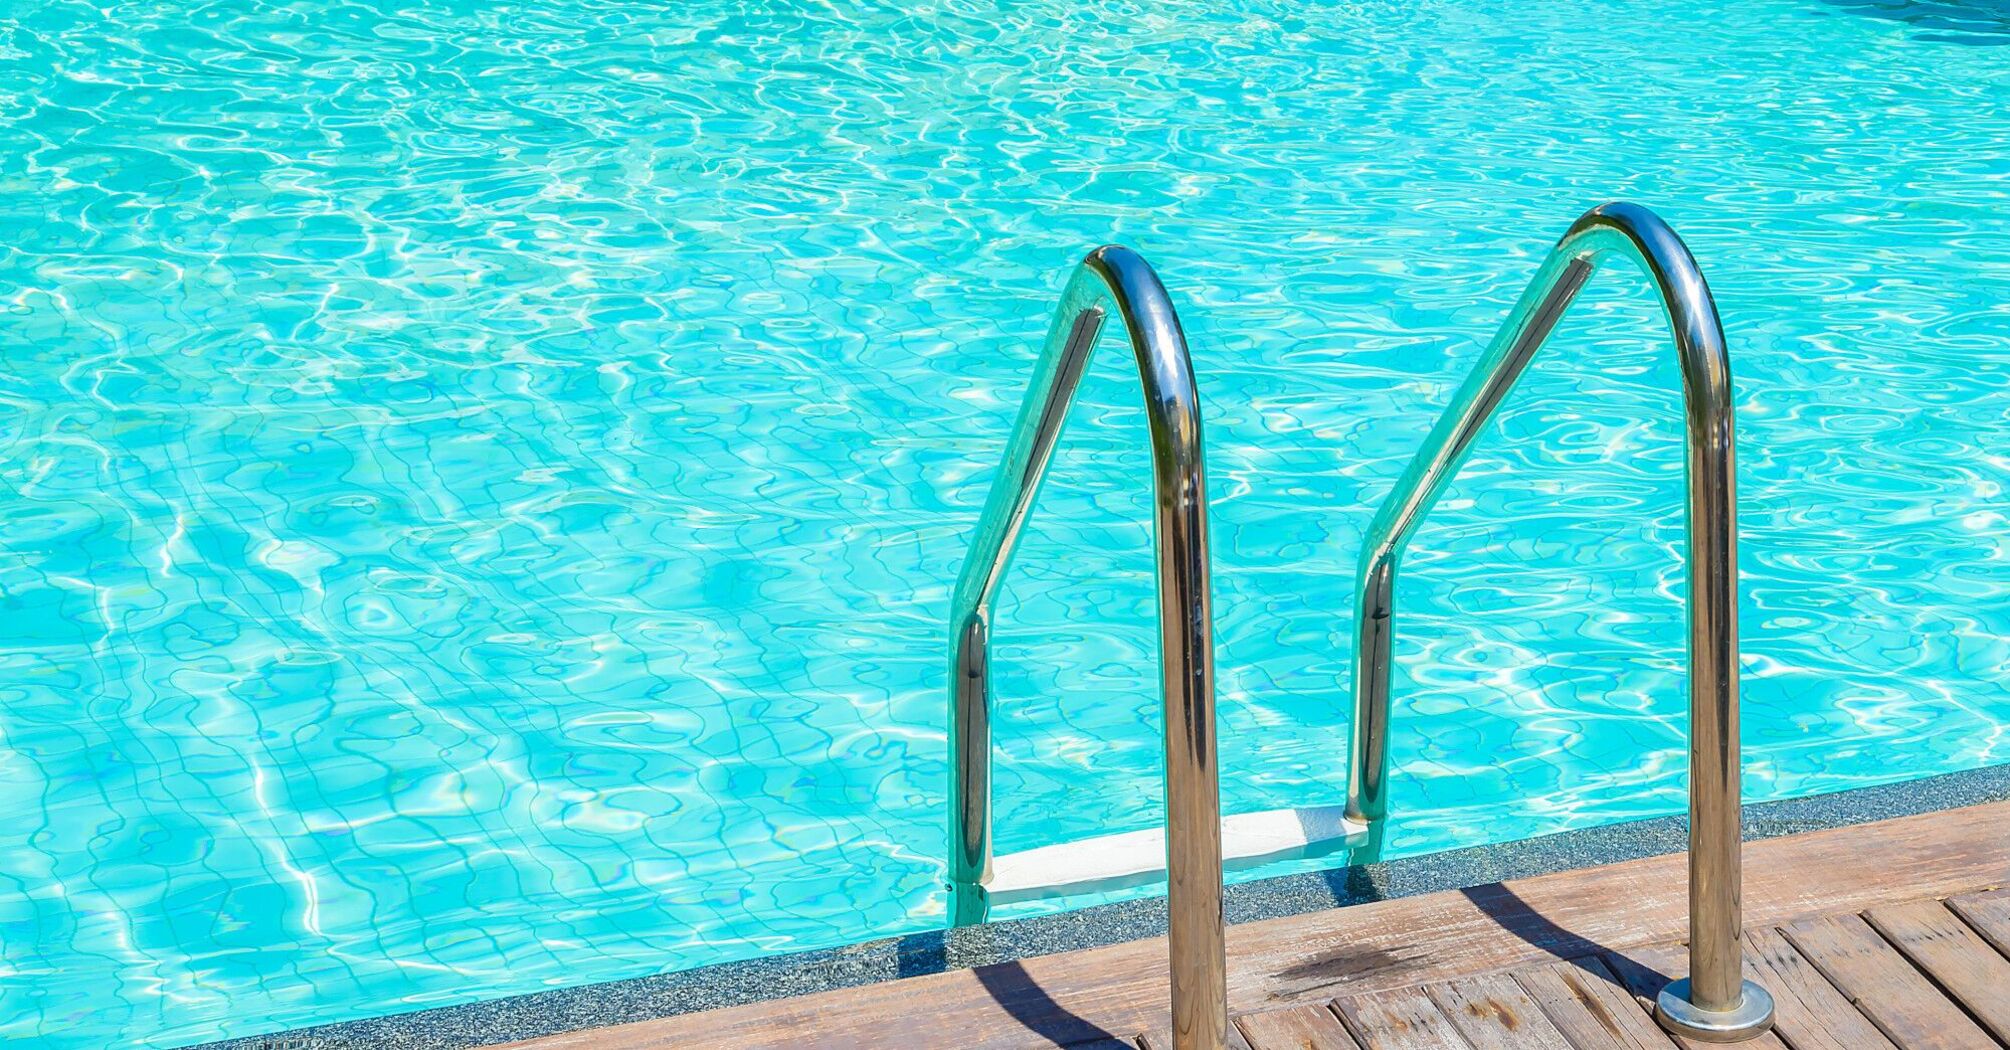 Strong smell of chlorine from the pool: reasons, and why swimming should be avoided